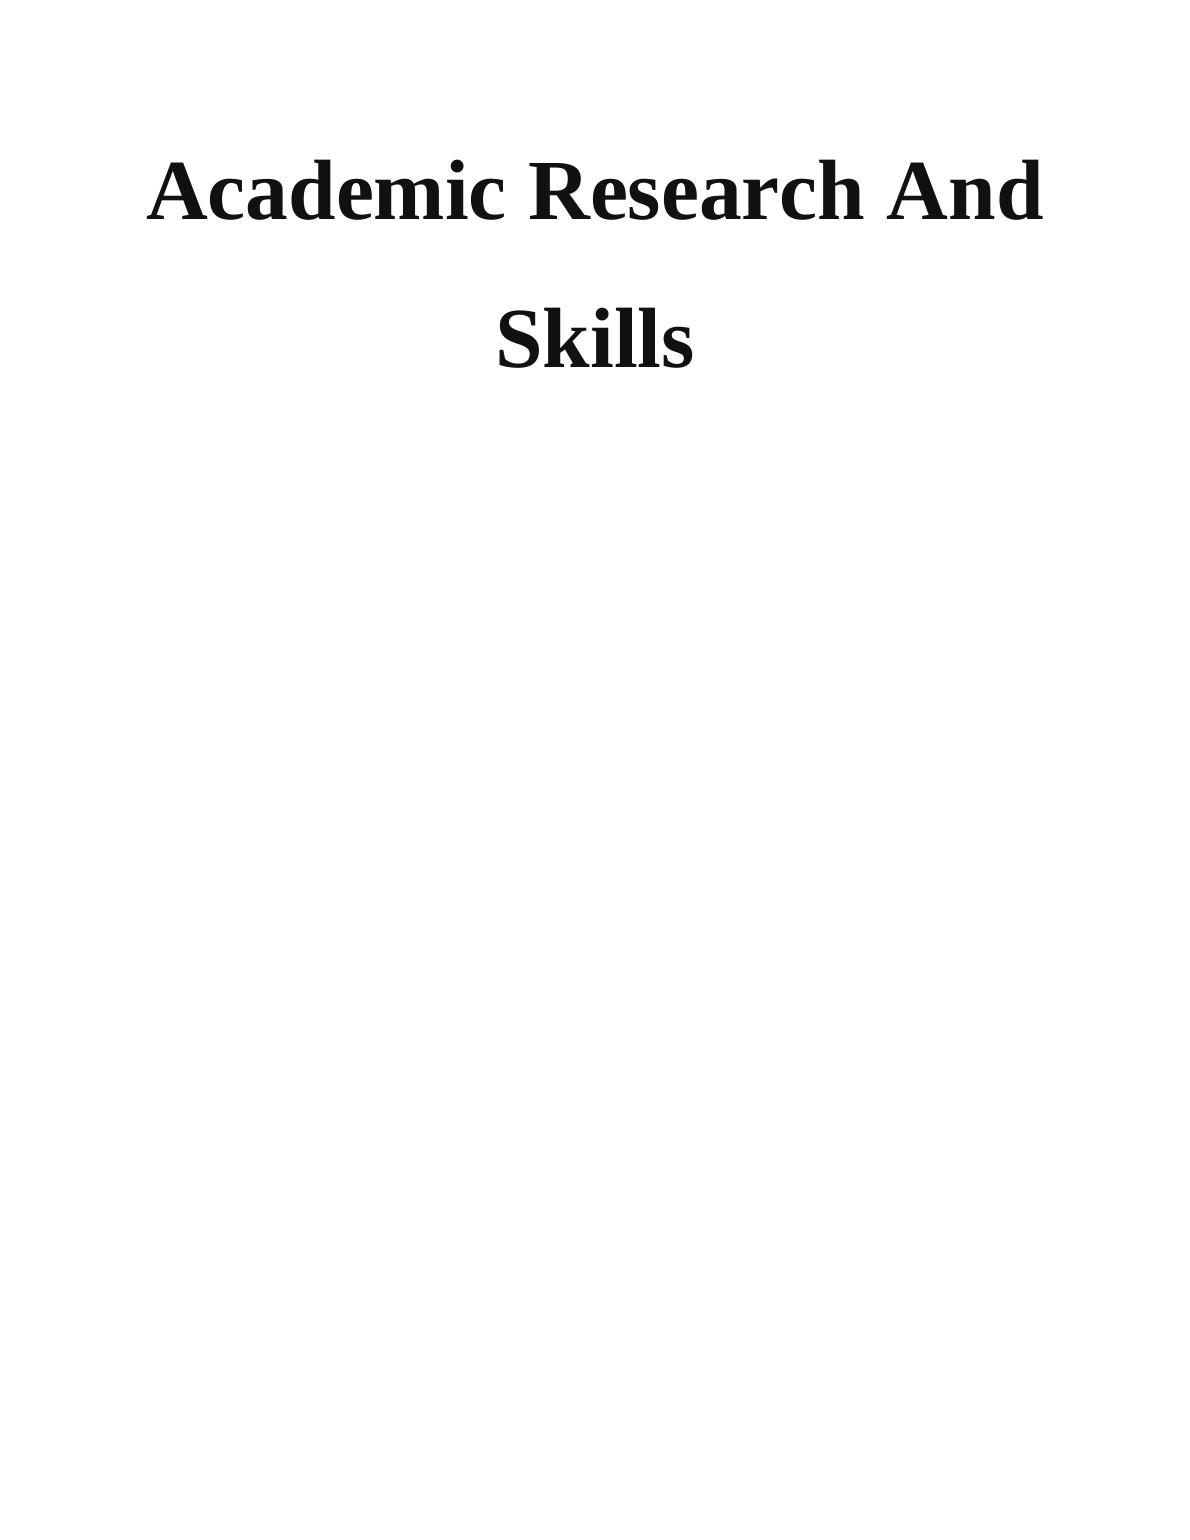 Academic Research And Skills - Doc_1